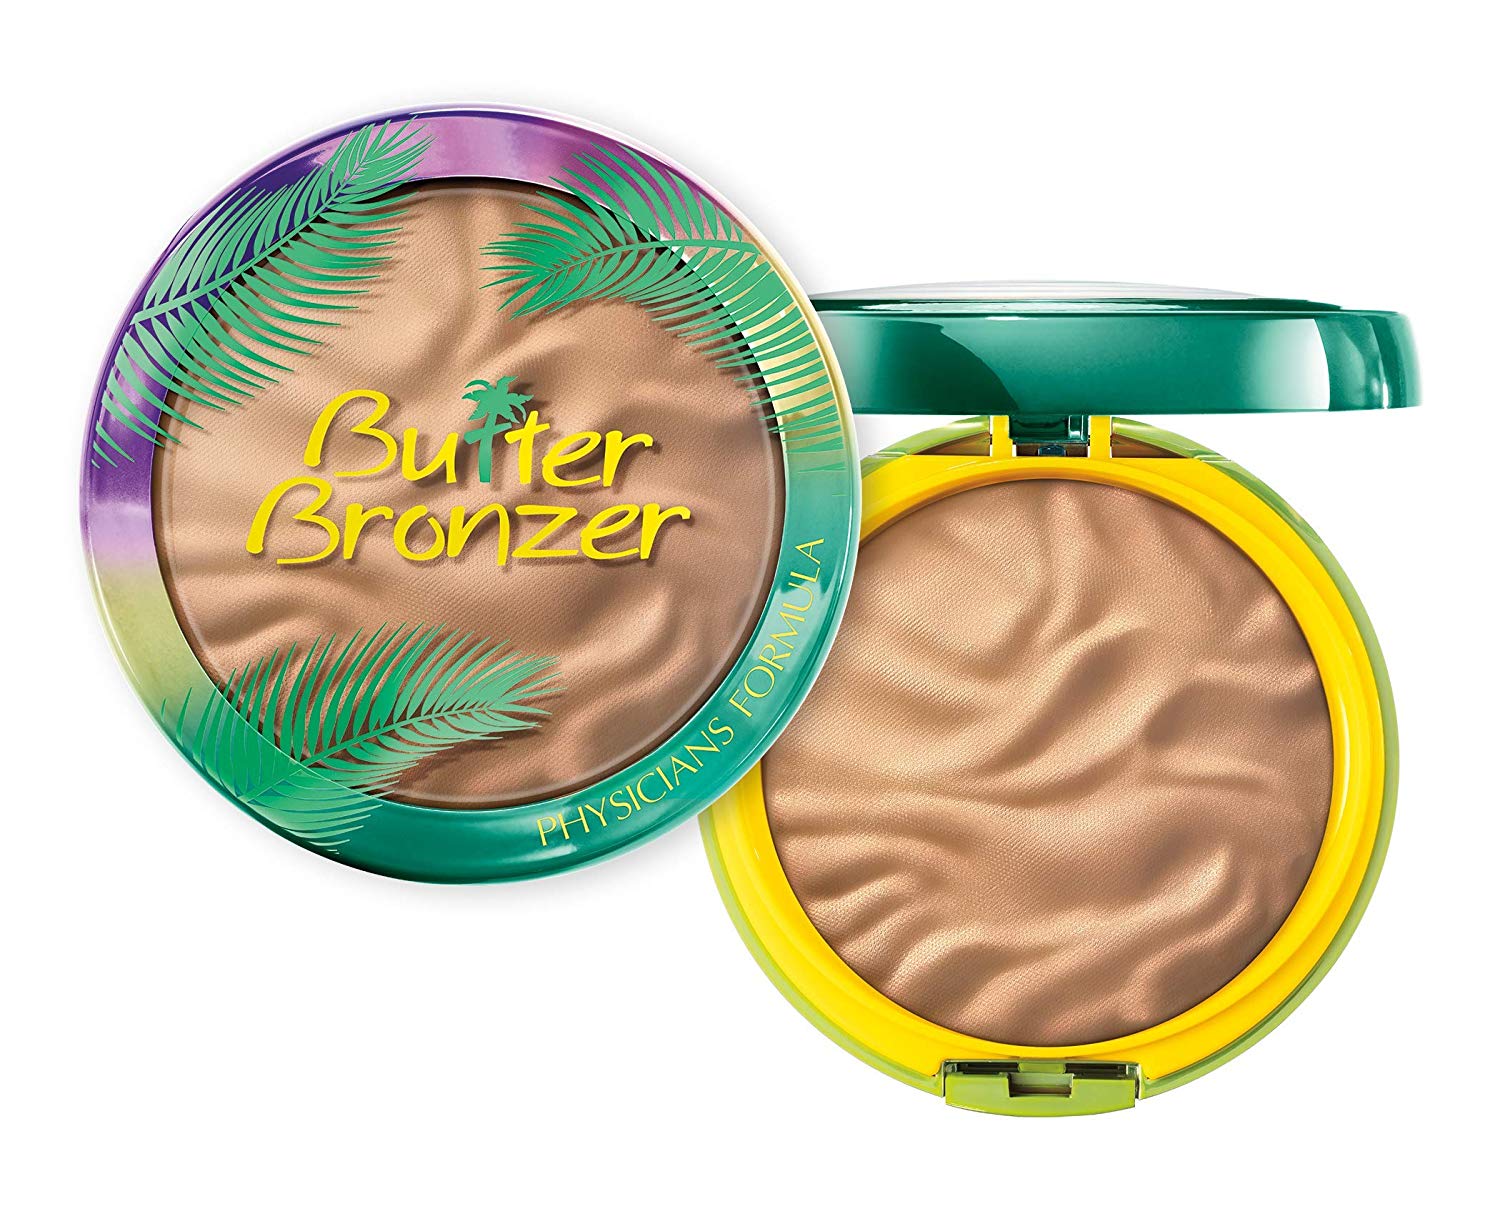 Top 4 Drugstore Face and Body Bronzers For Pale Skin